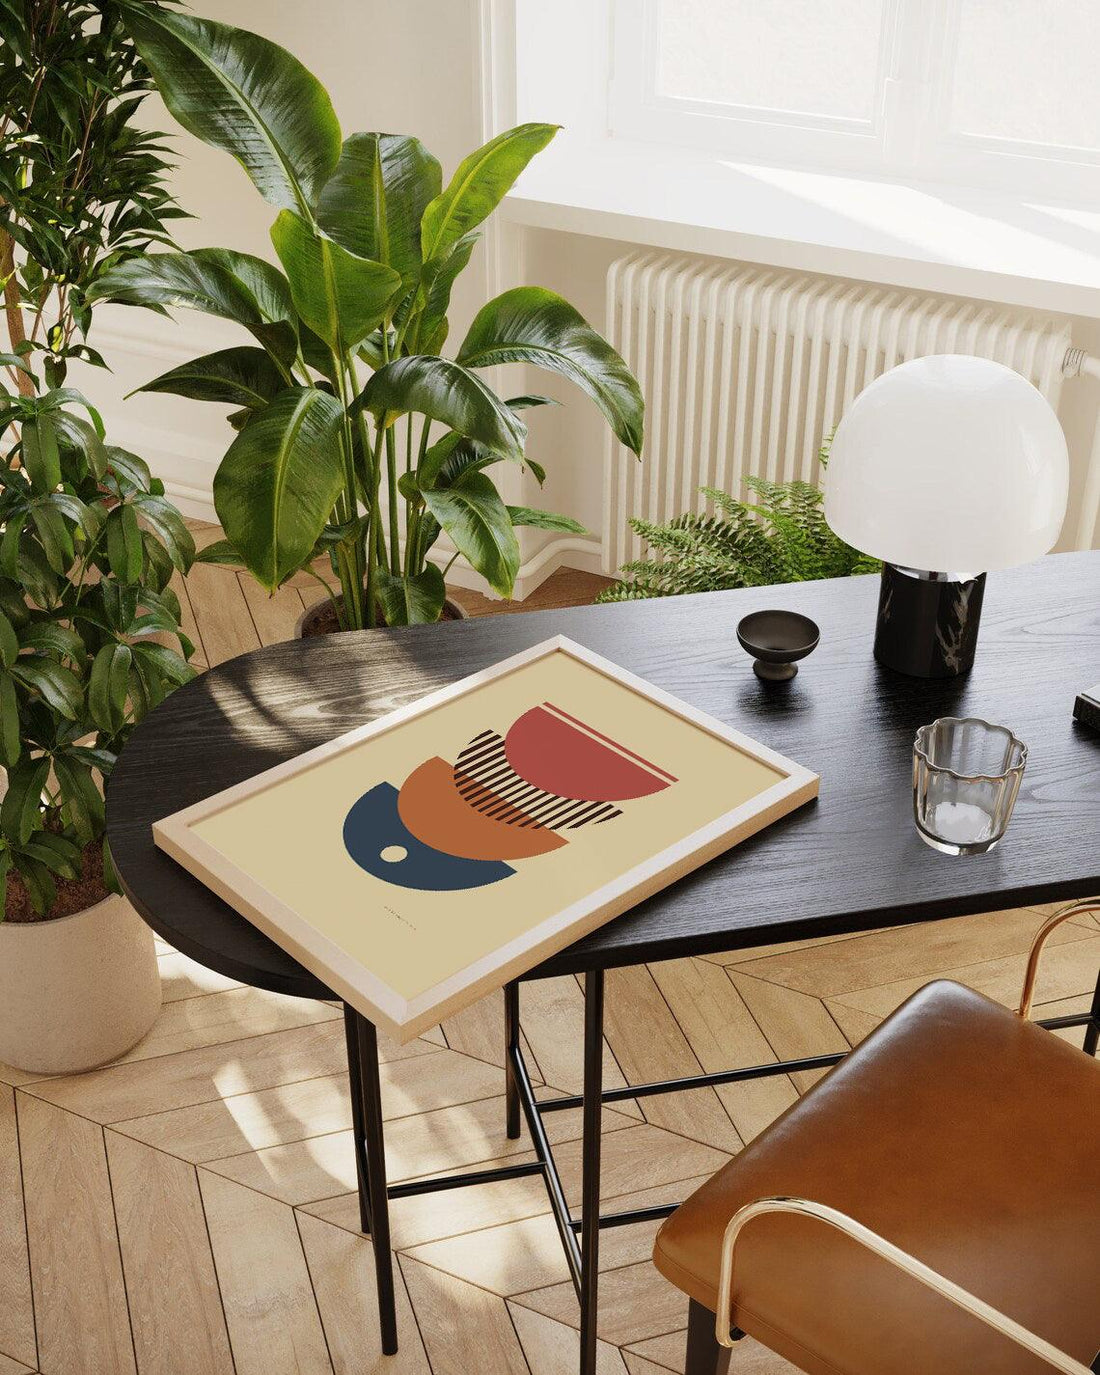 How to Frame Your Art Prints on a Budget